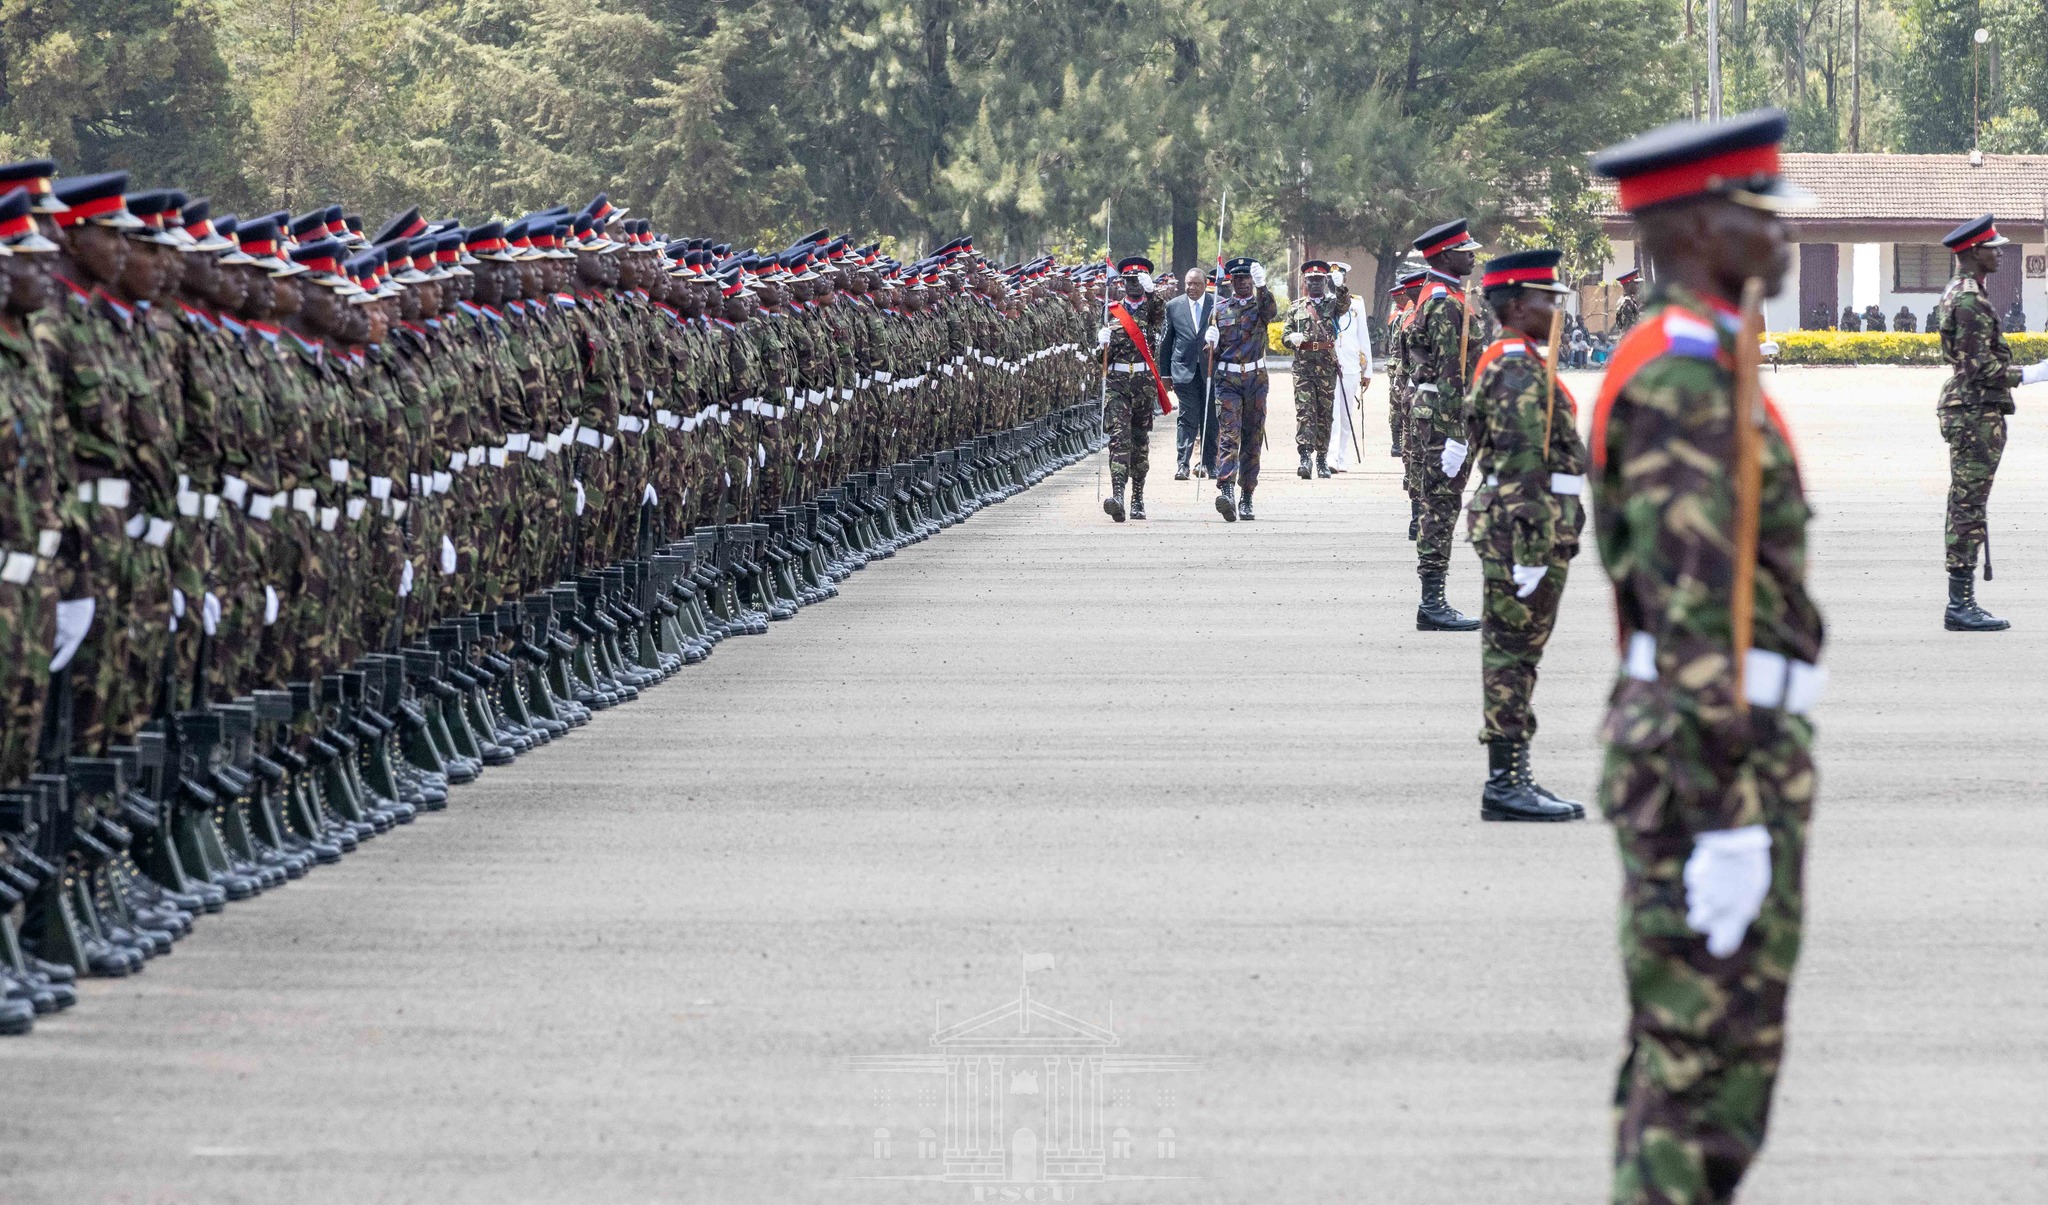 President Kenyatta Lauds KDF For Serving The Country Beyond The Call Of Duty